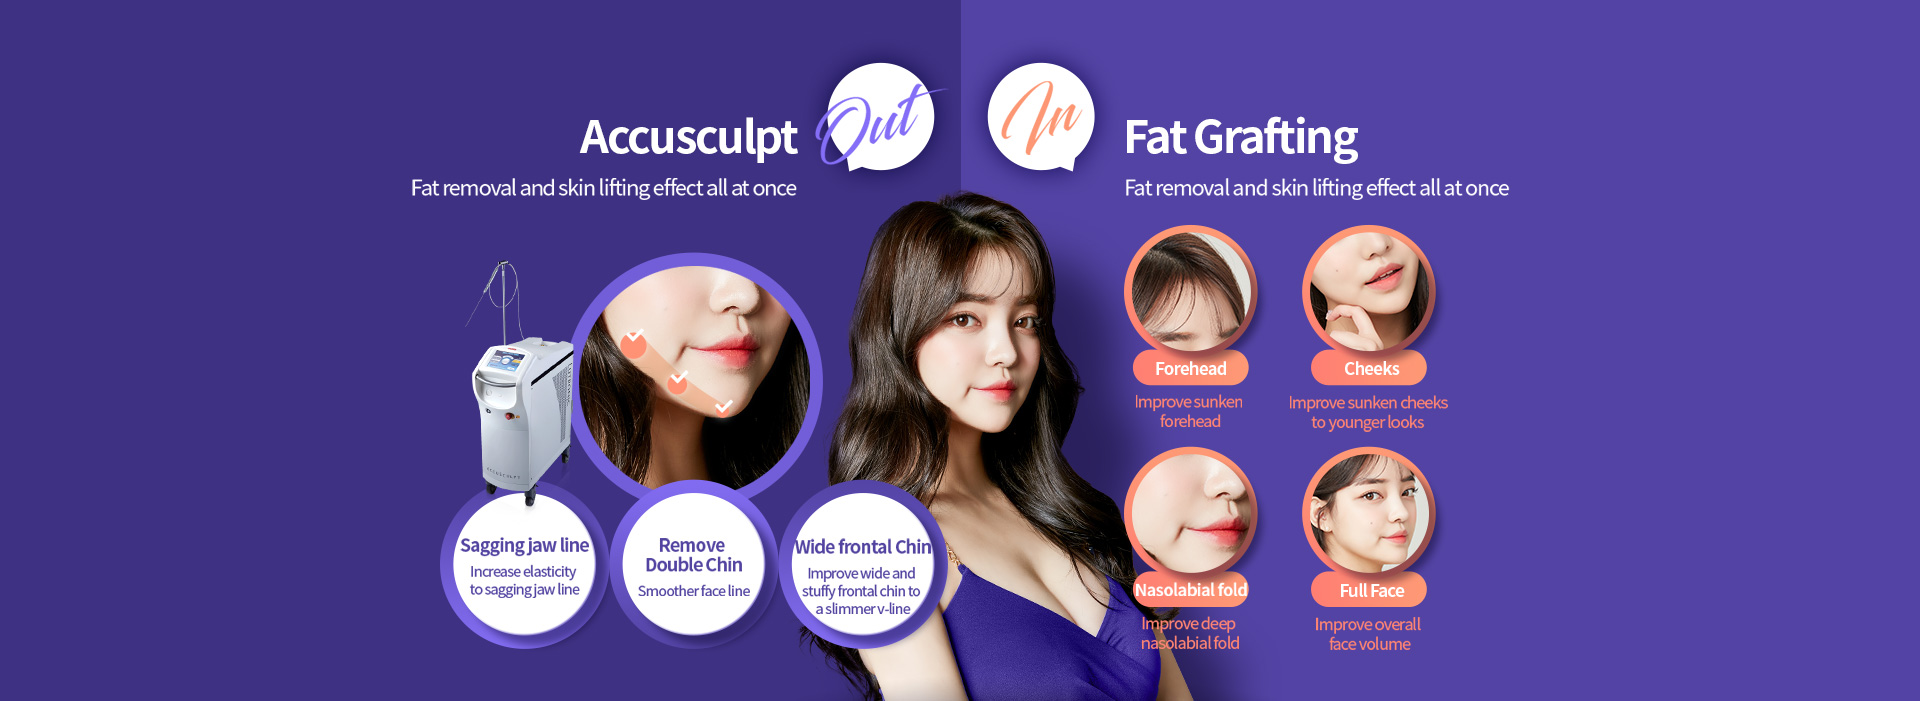 Accusculpt: Fat removal and skin lifting effect all at once, Fat Grafting: Improve face line and volume all at once